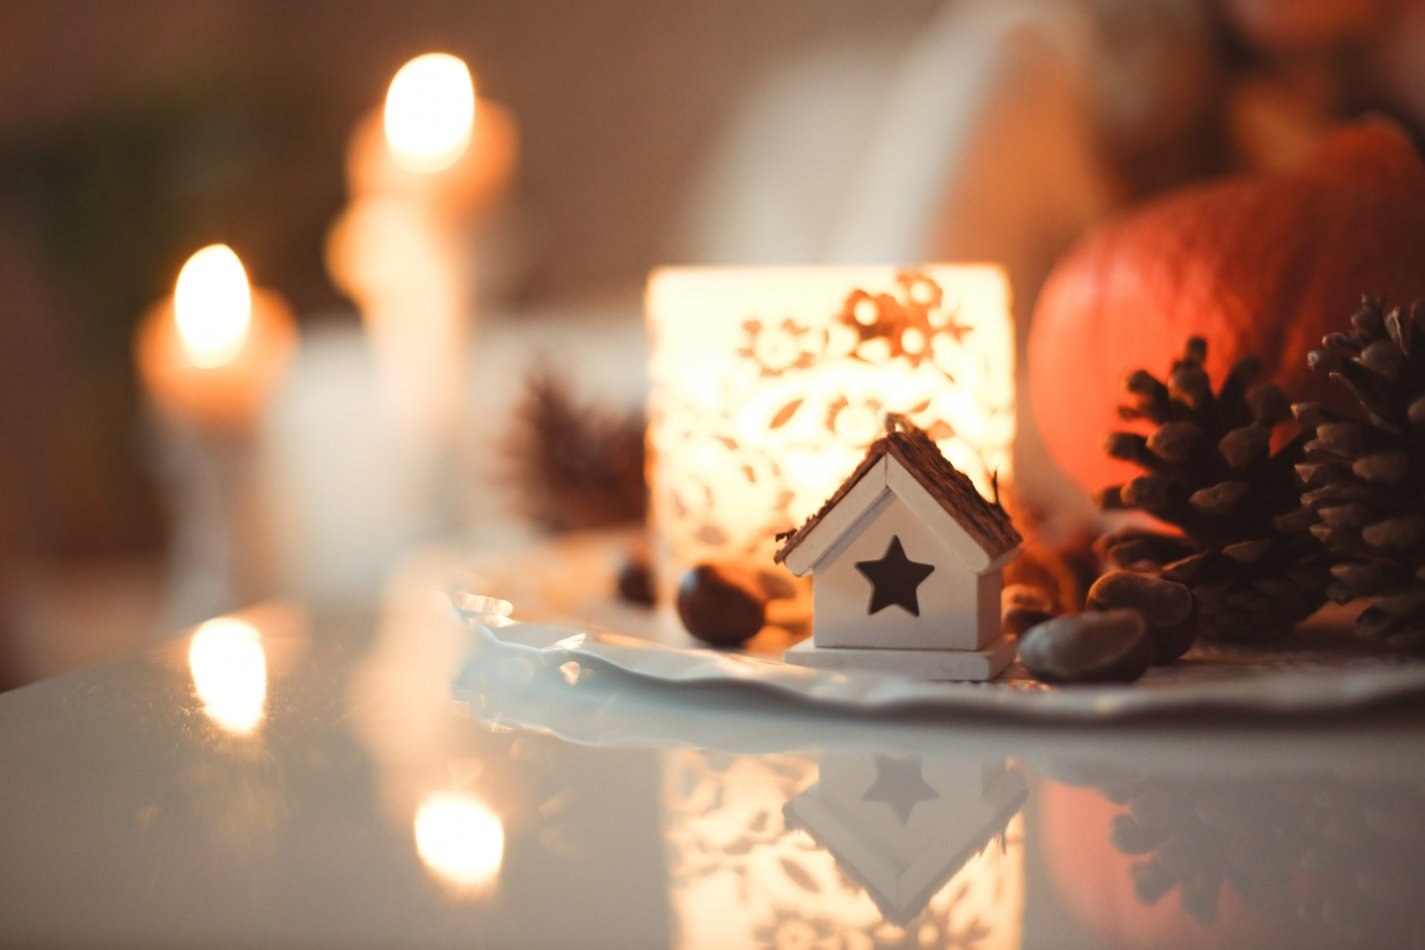 Bright, decorative holiday decor home in front of blurred background of twinkling holiday lights.